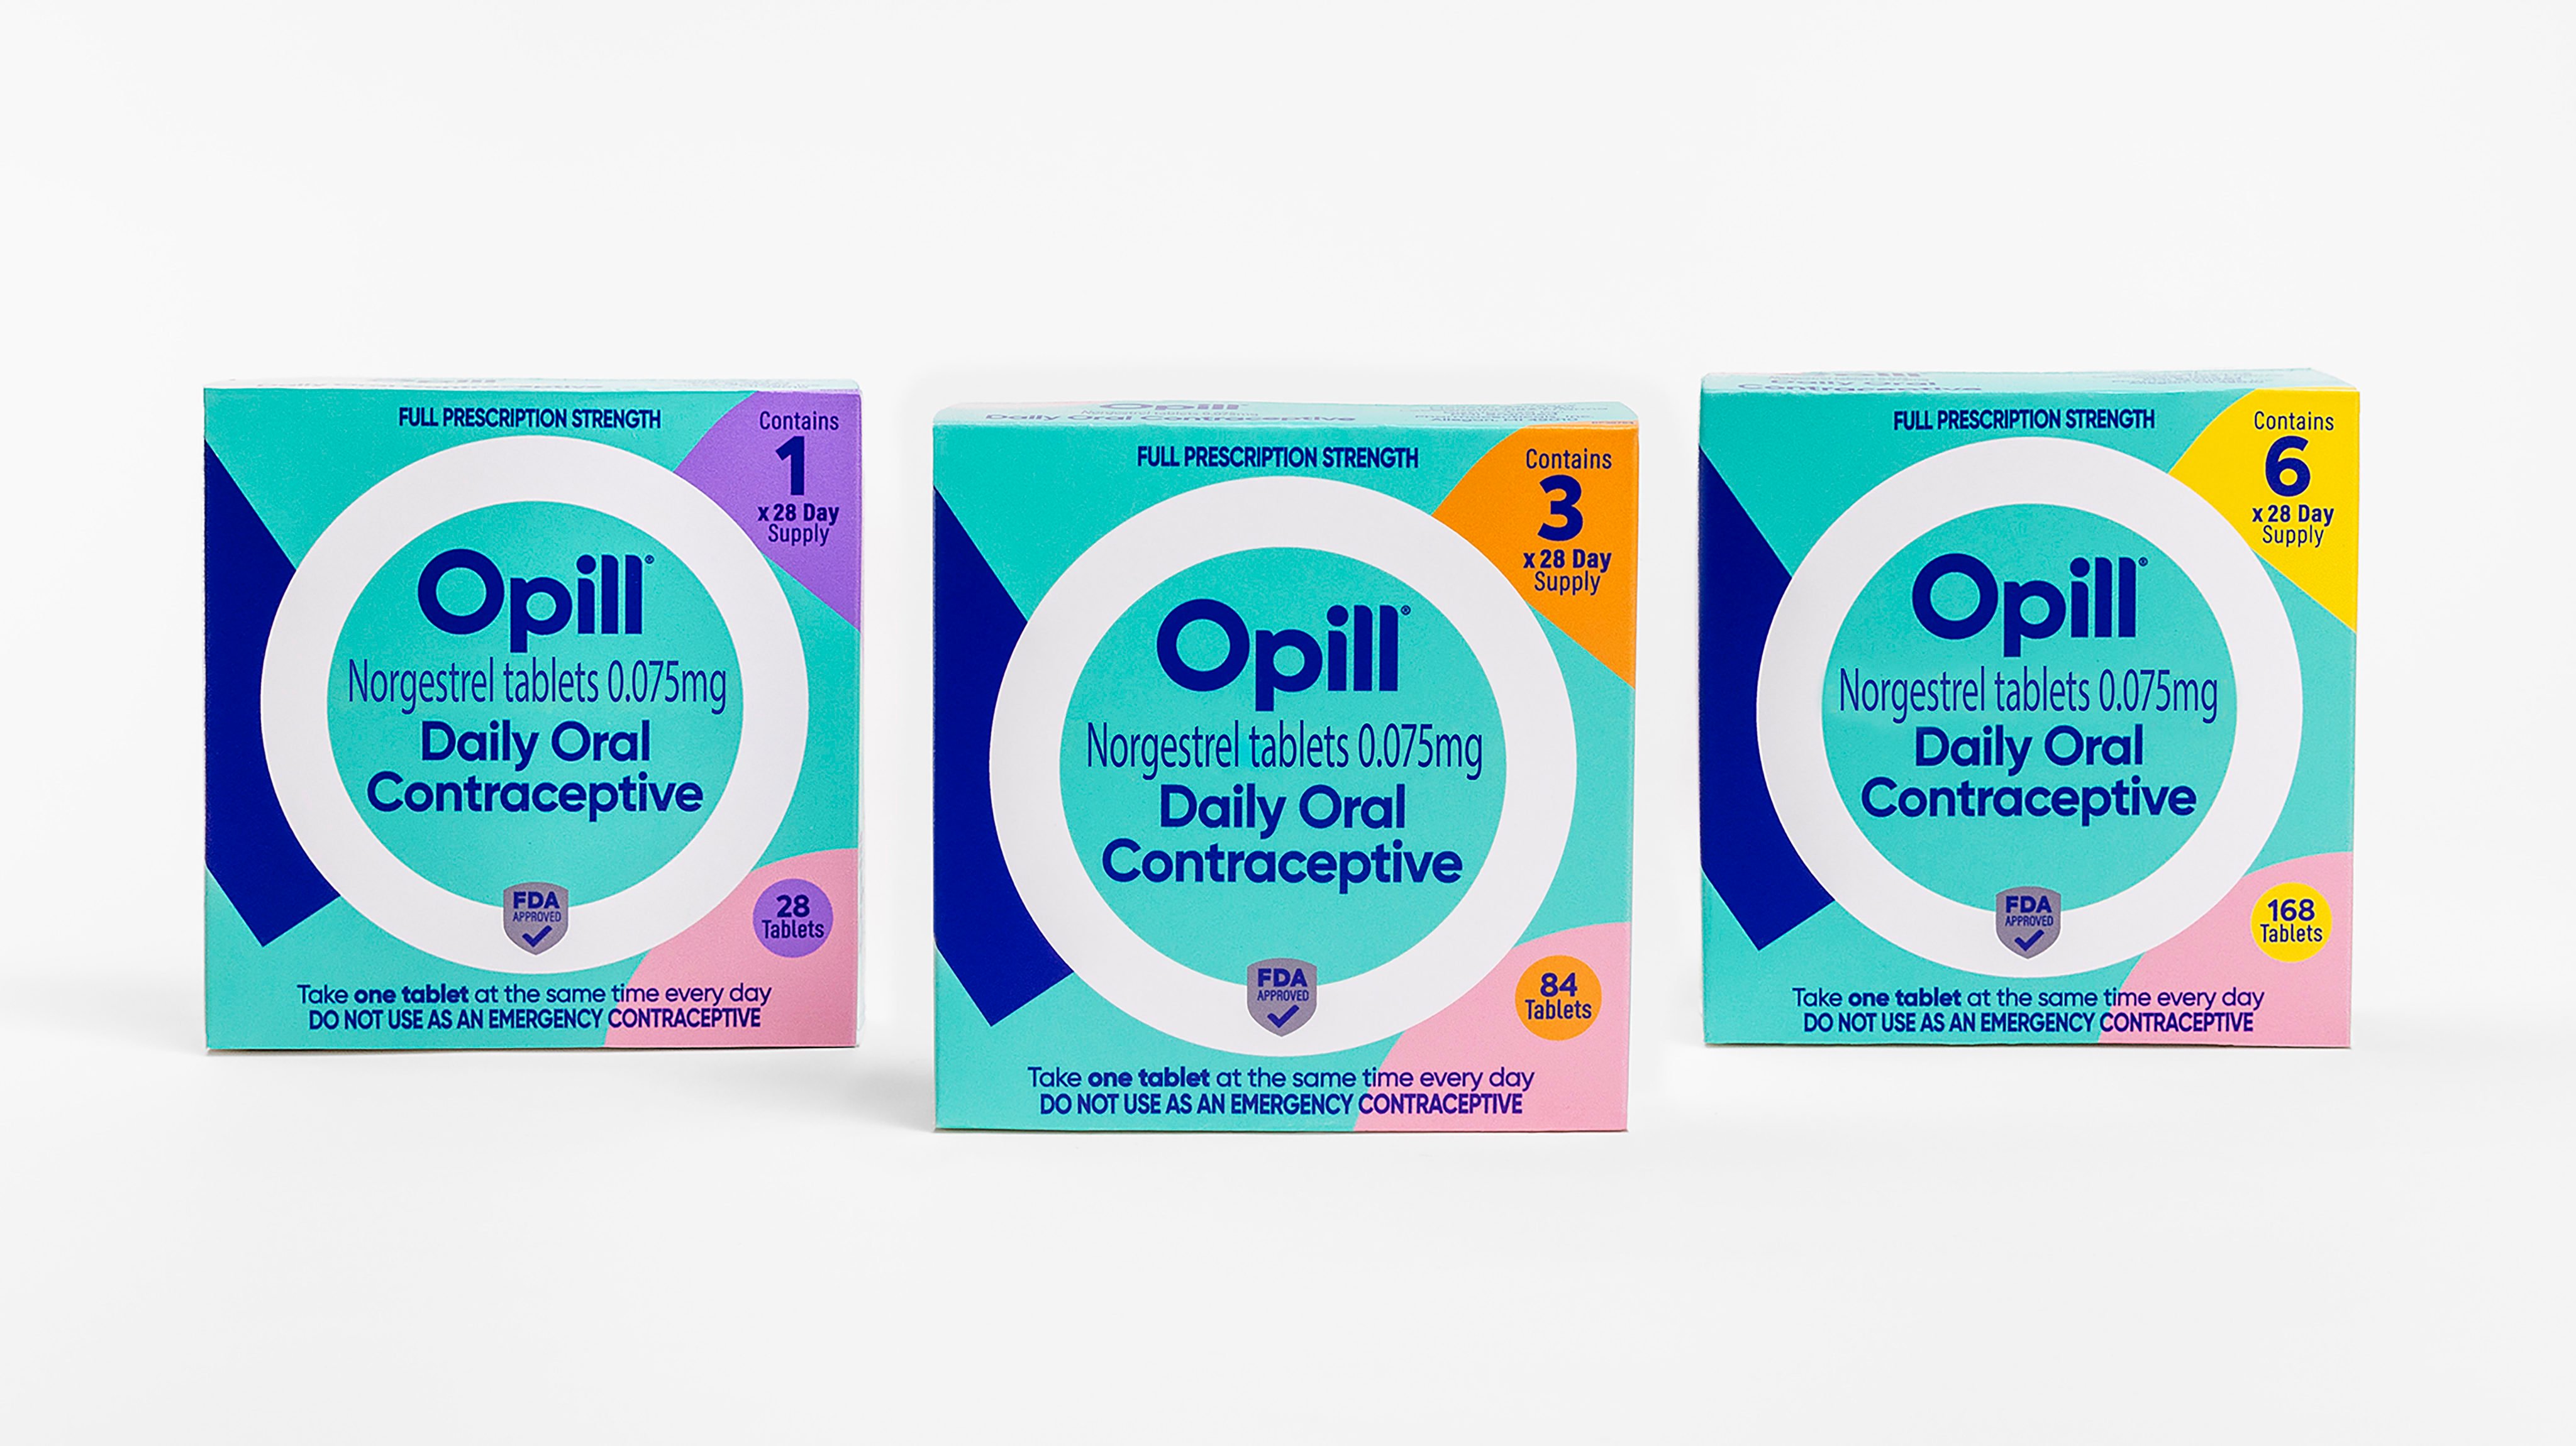 Opill was cleared last year by the Food and Drug Administration for sale without prescription. Photo: Perrigo Company via AP